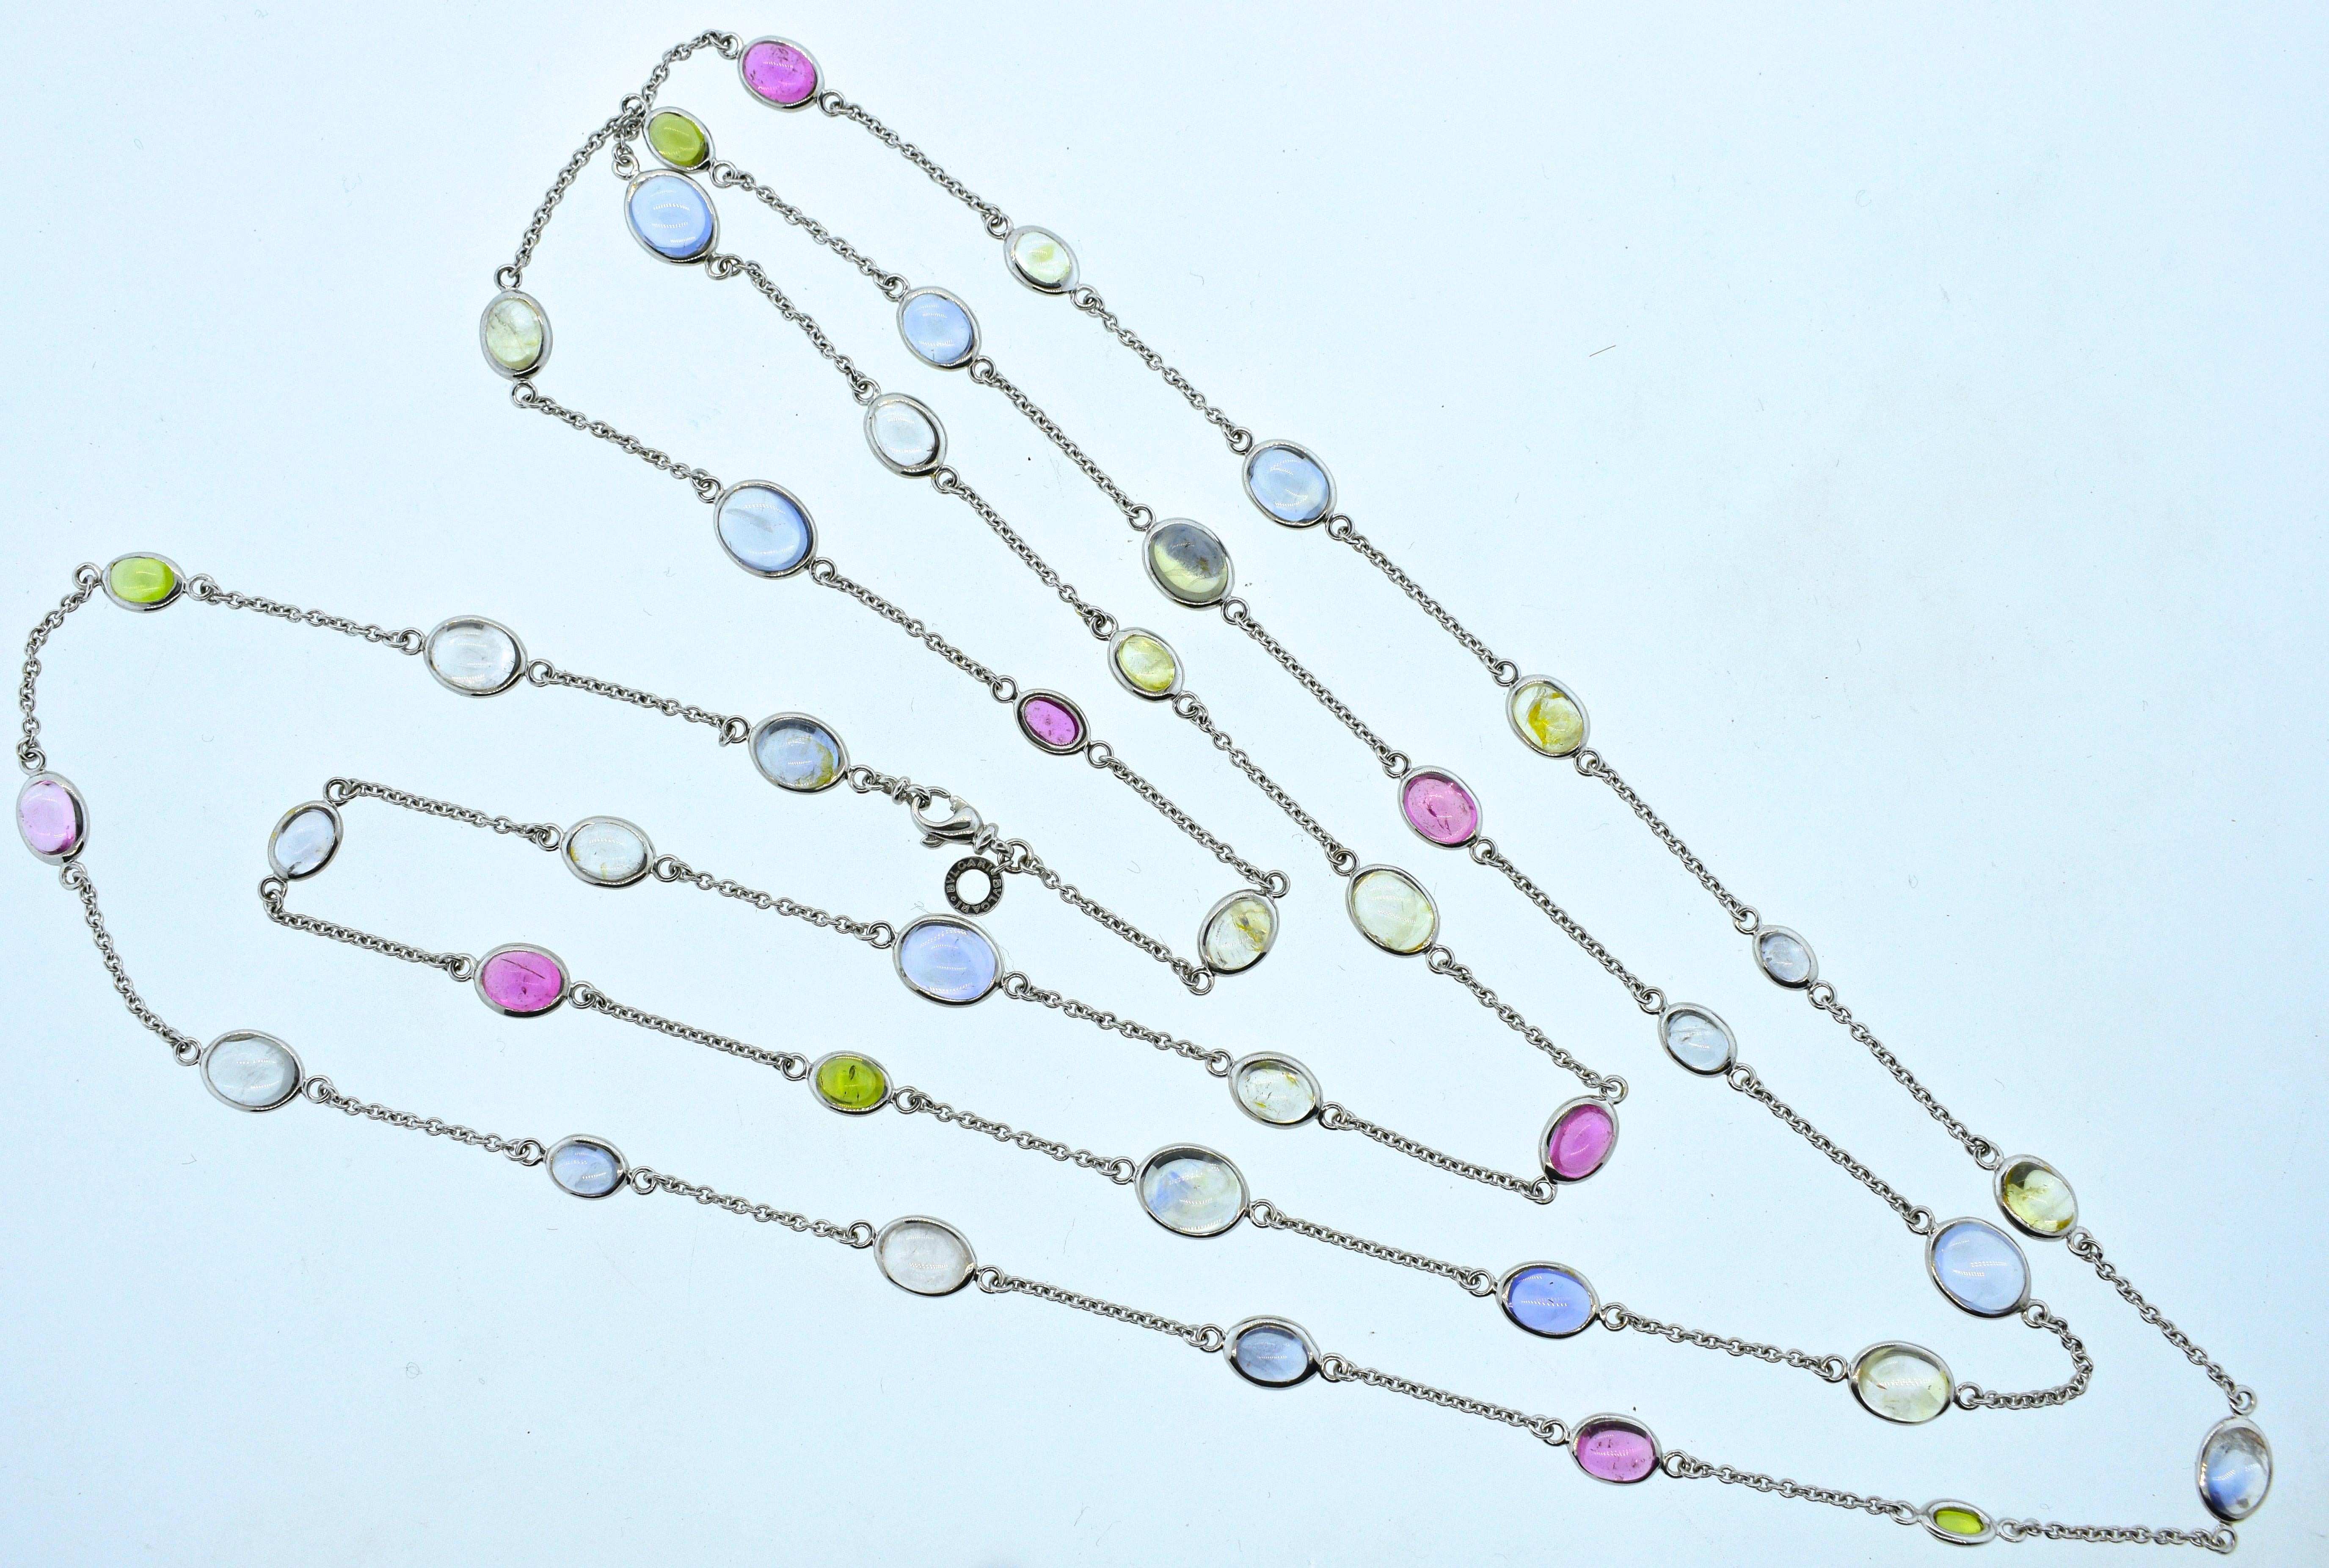 Bulgari long 18K white gold chain set with 41 sapphires of various colors, this necklace is 57 inches long and 42 grams.  This colorful necklace can be worn a variety of different lengths making this necklace quite versatile and easy to wear.  Made